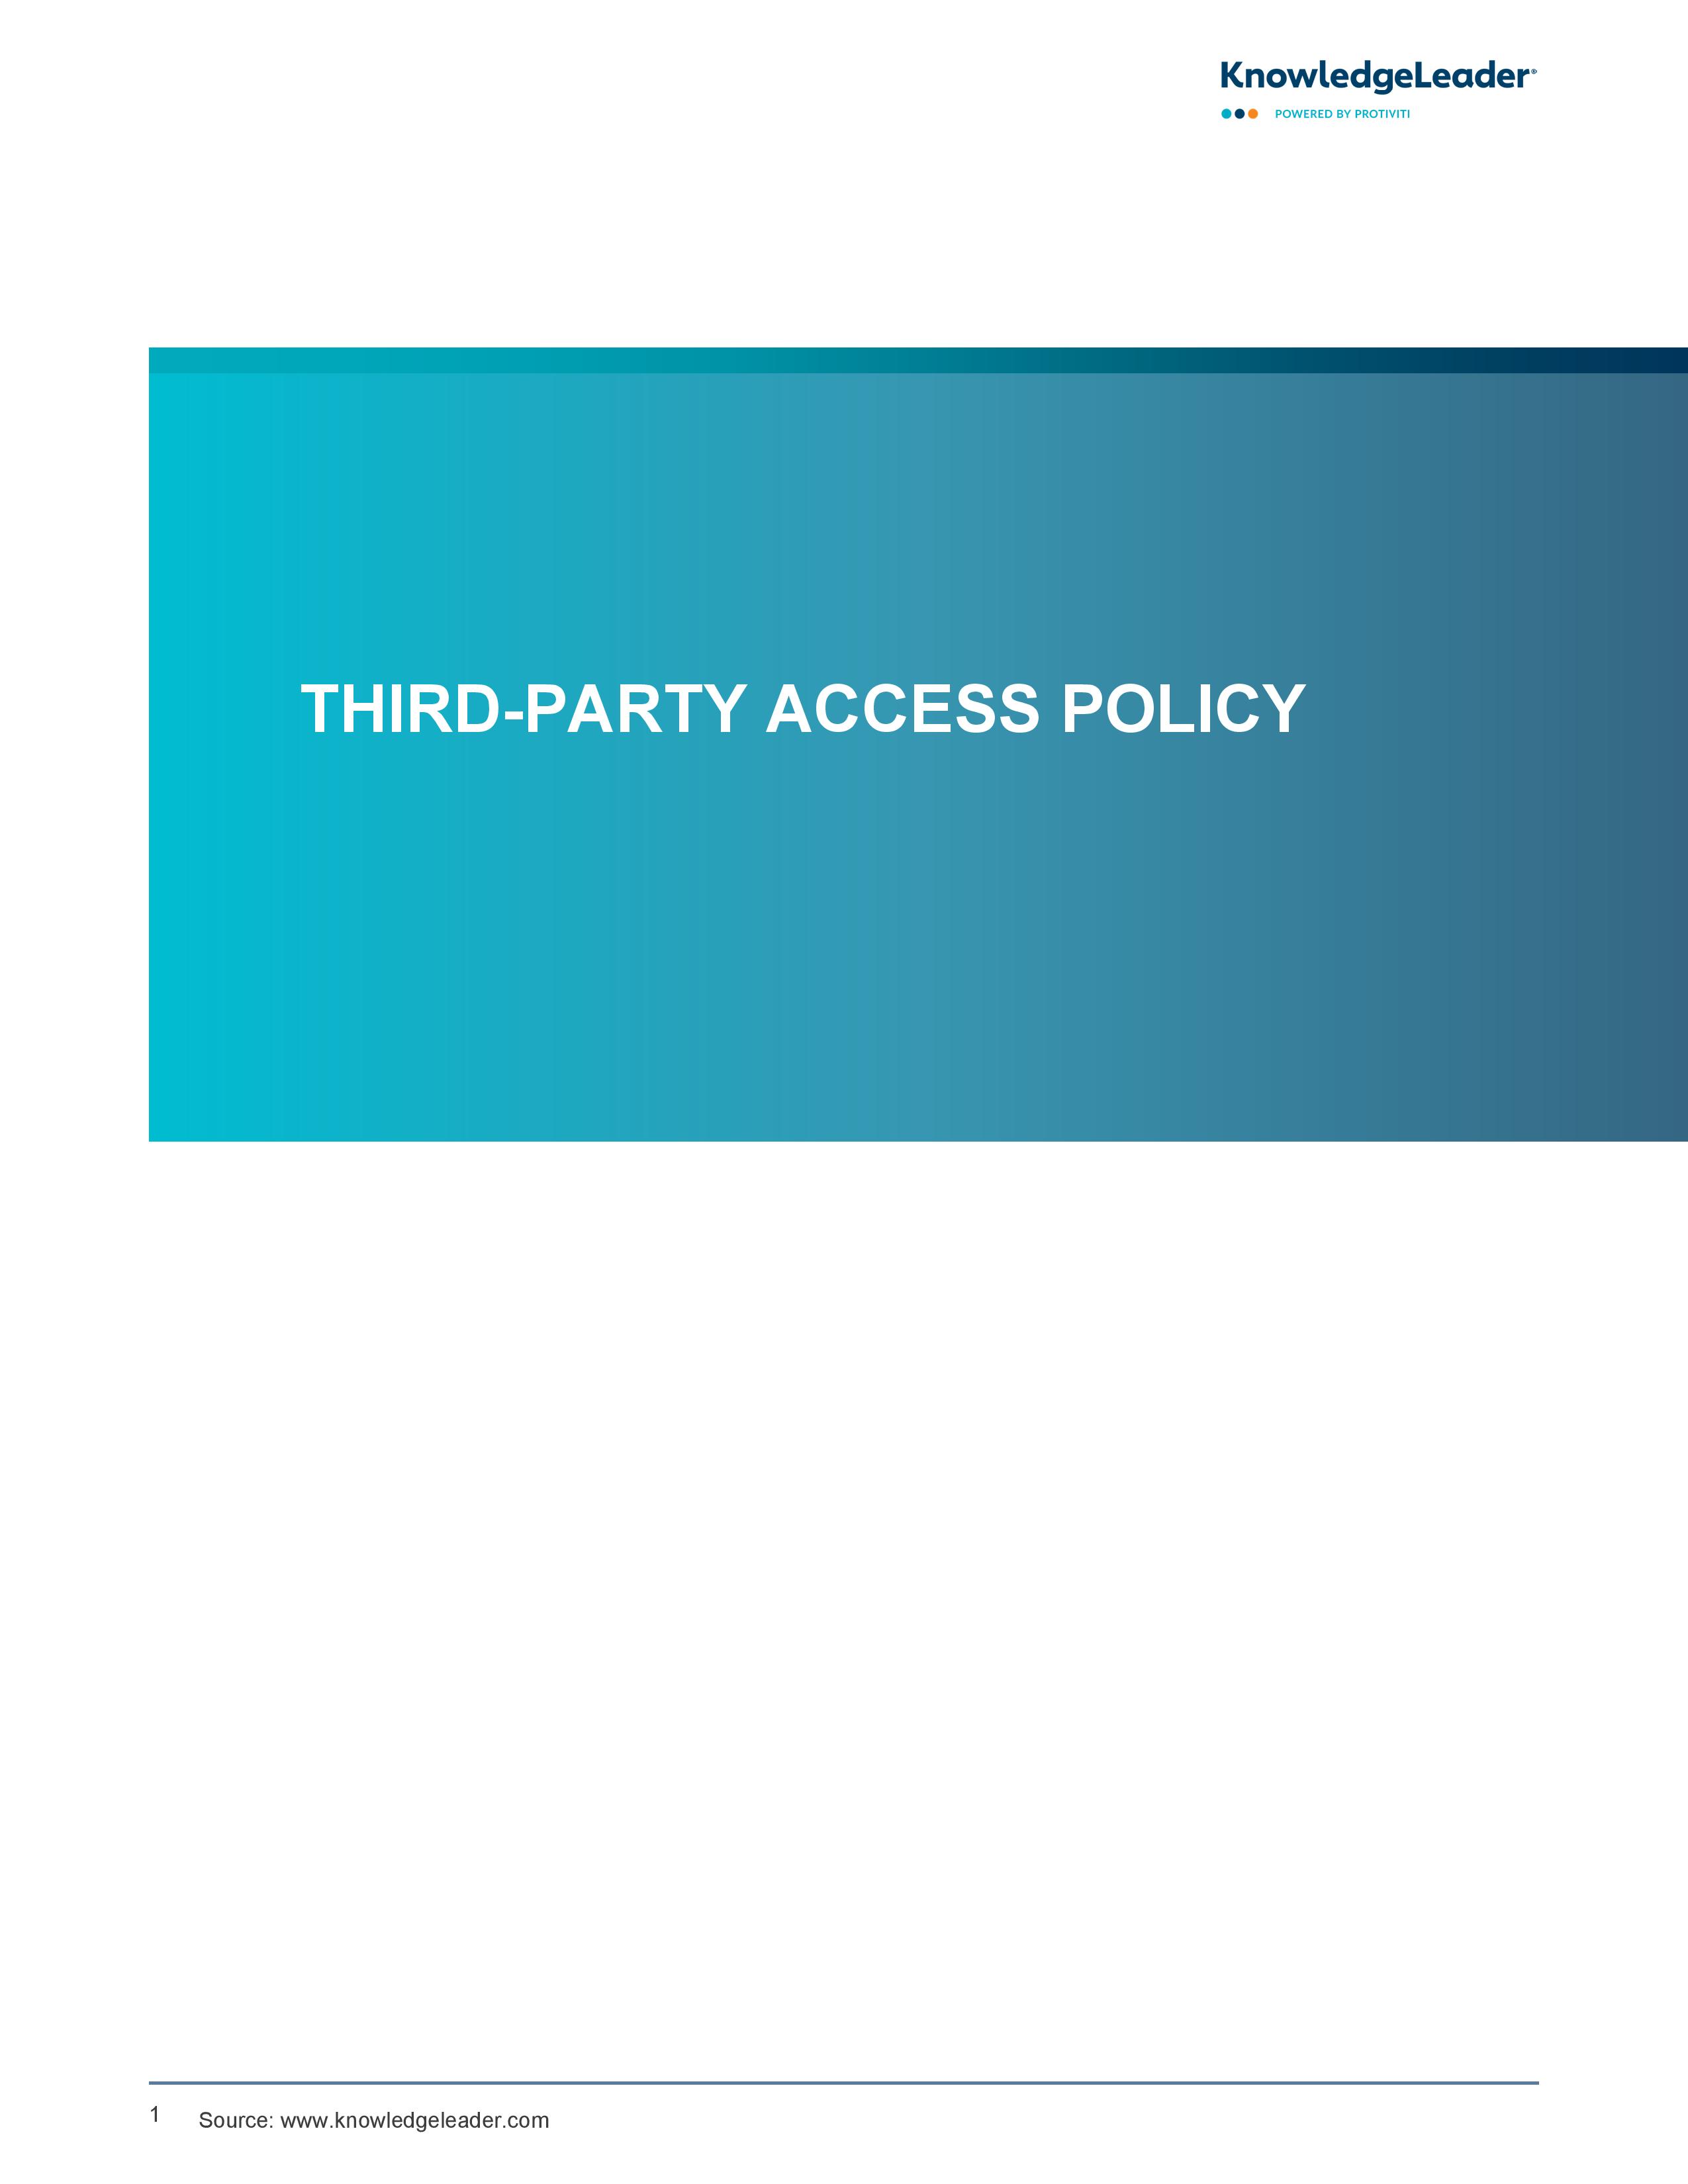 Screenshot of the First Page of Third-Party Access Policy